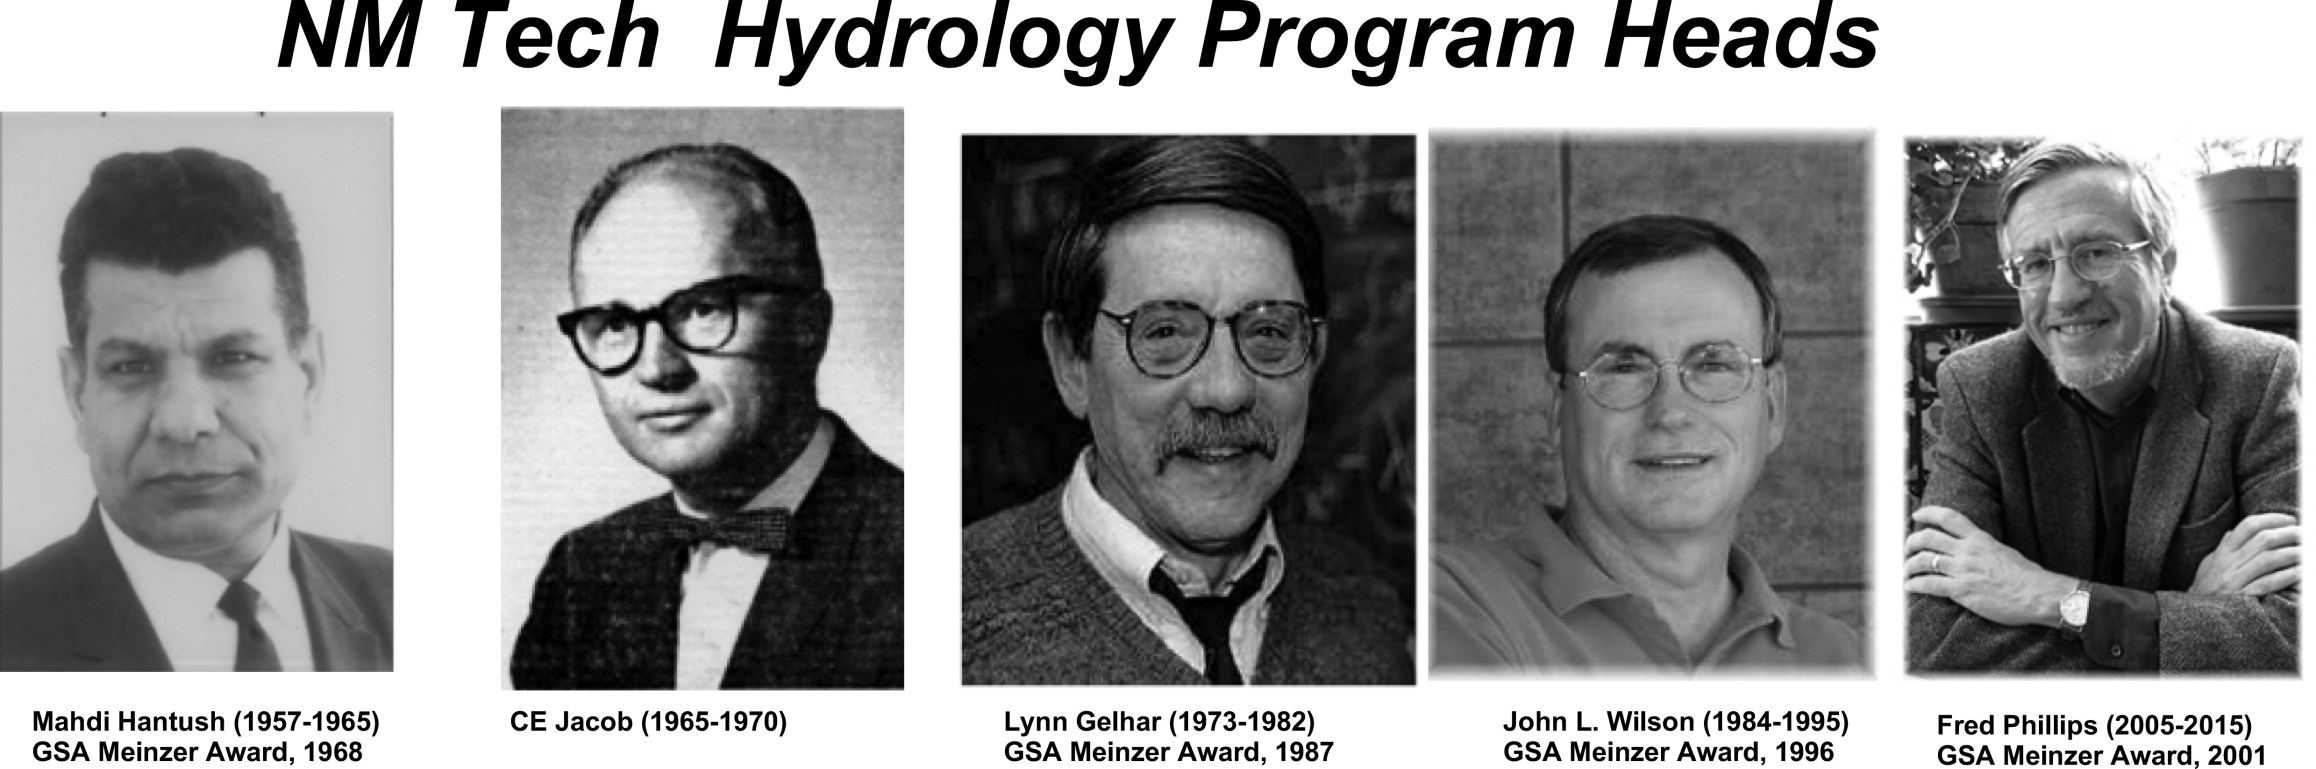 Past hydrology heads of NMT